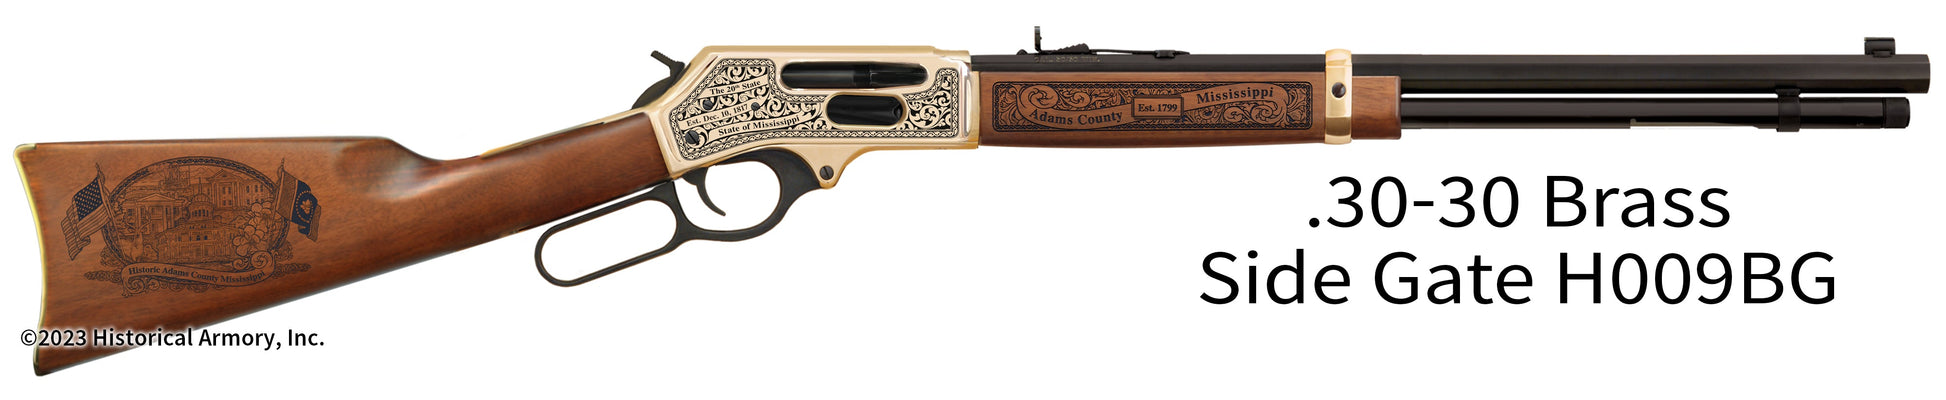 Adams County Mississippi Engraved Henry .30-30 Brass Side Gate Rifle